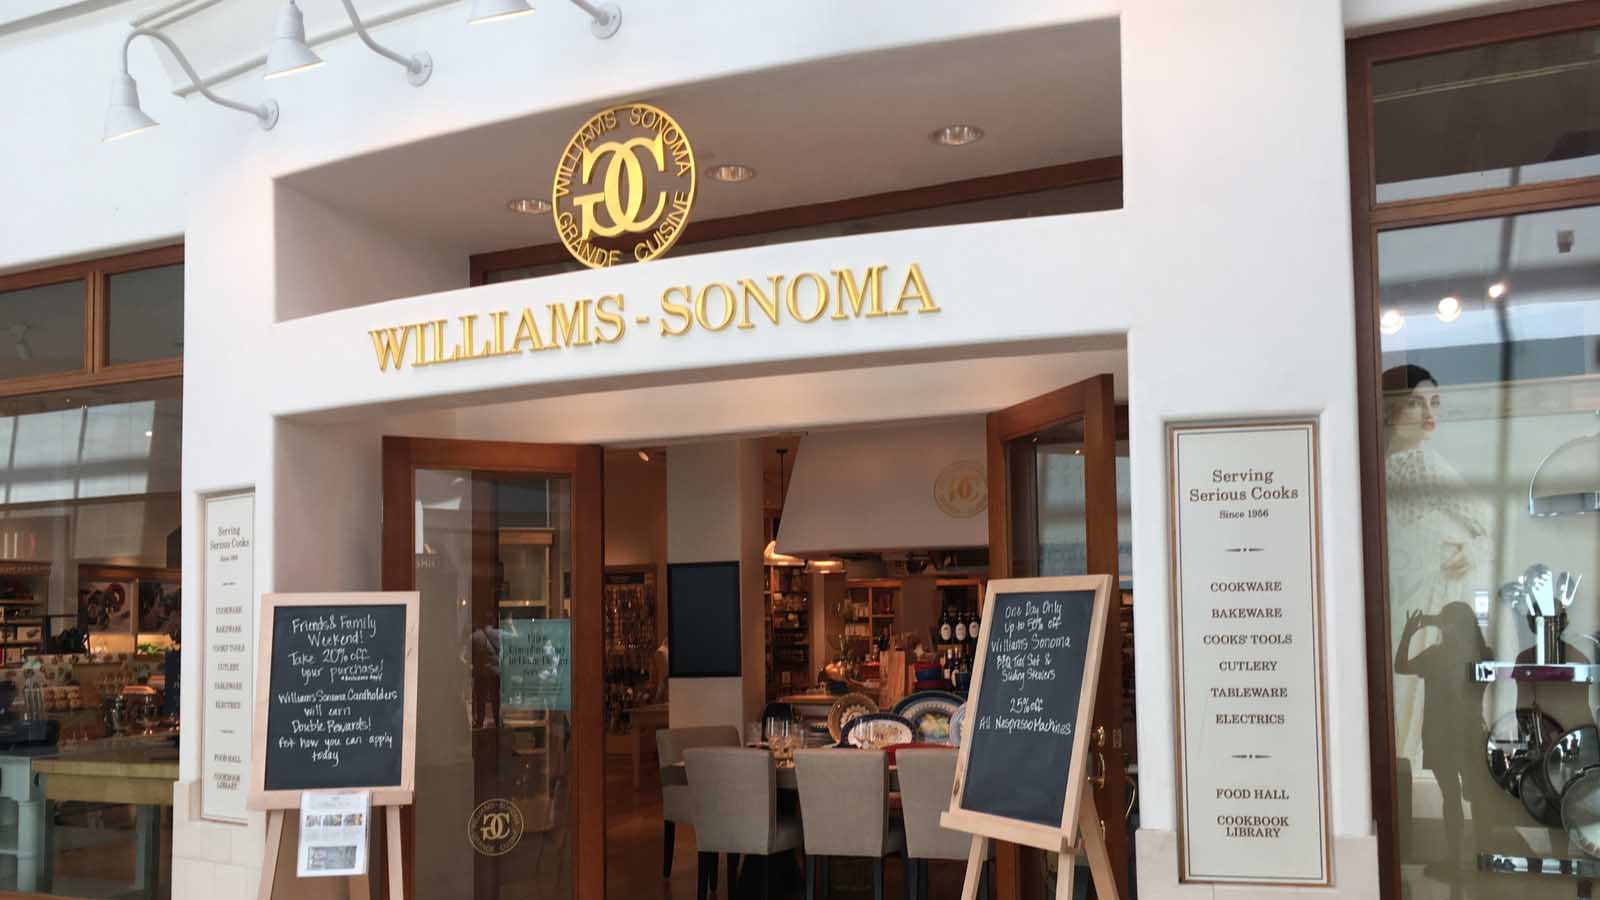 Williams-Sonoma (WSM) store in a shopping mall